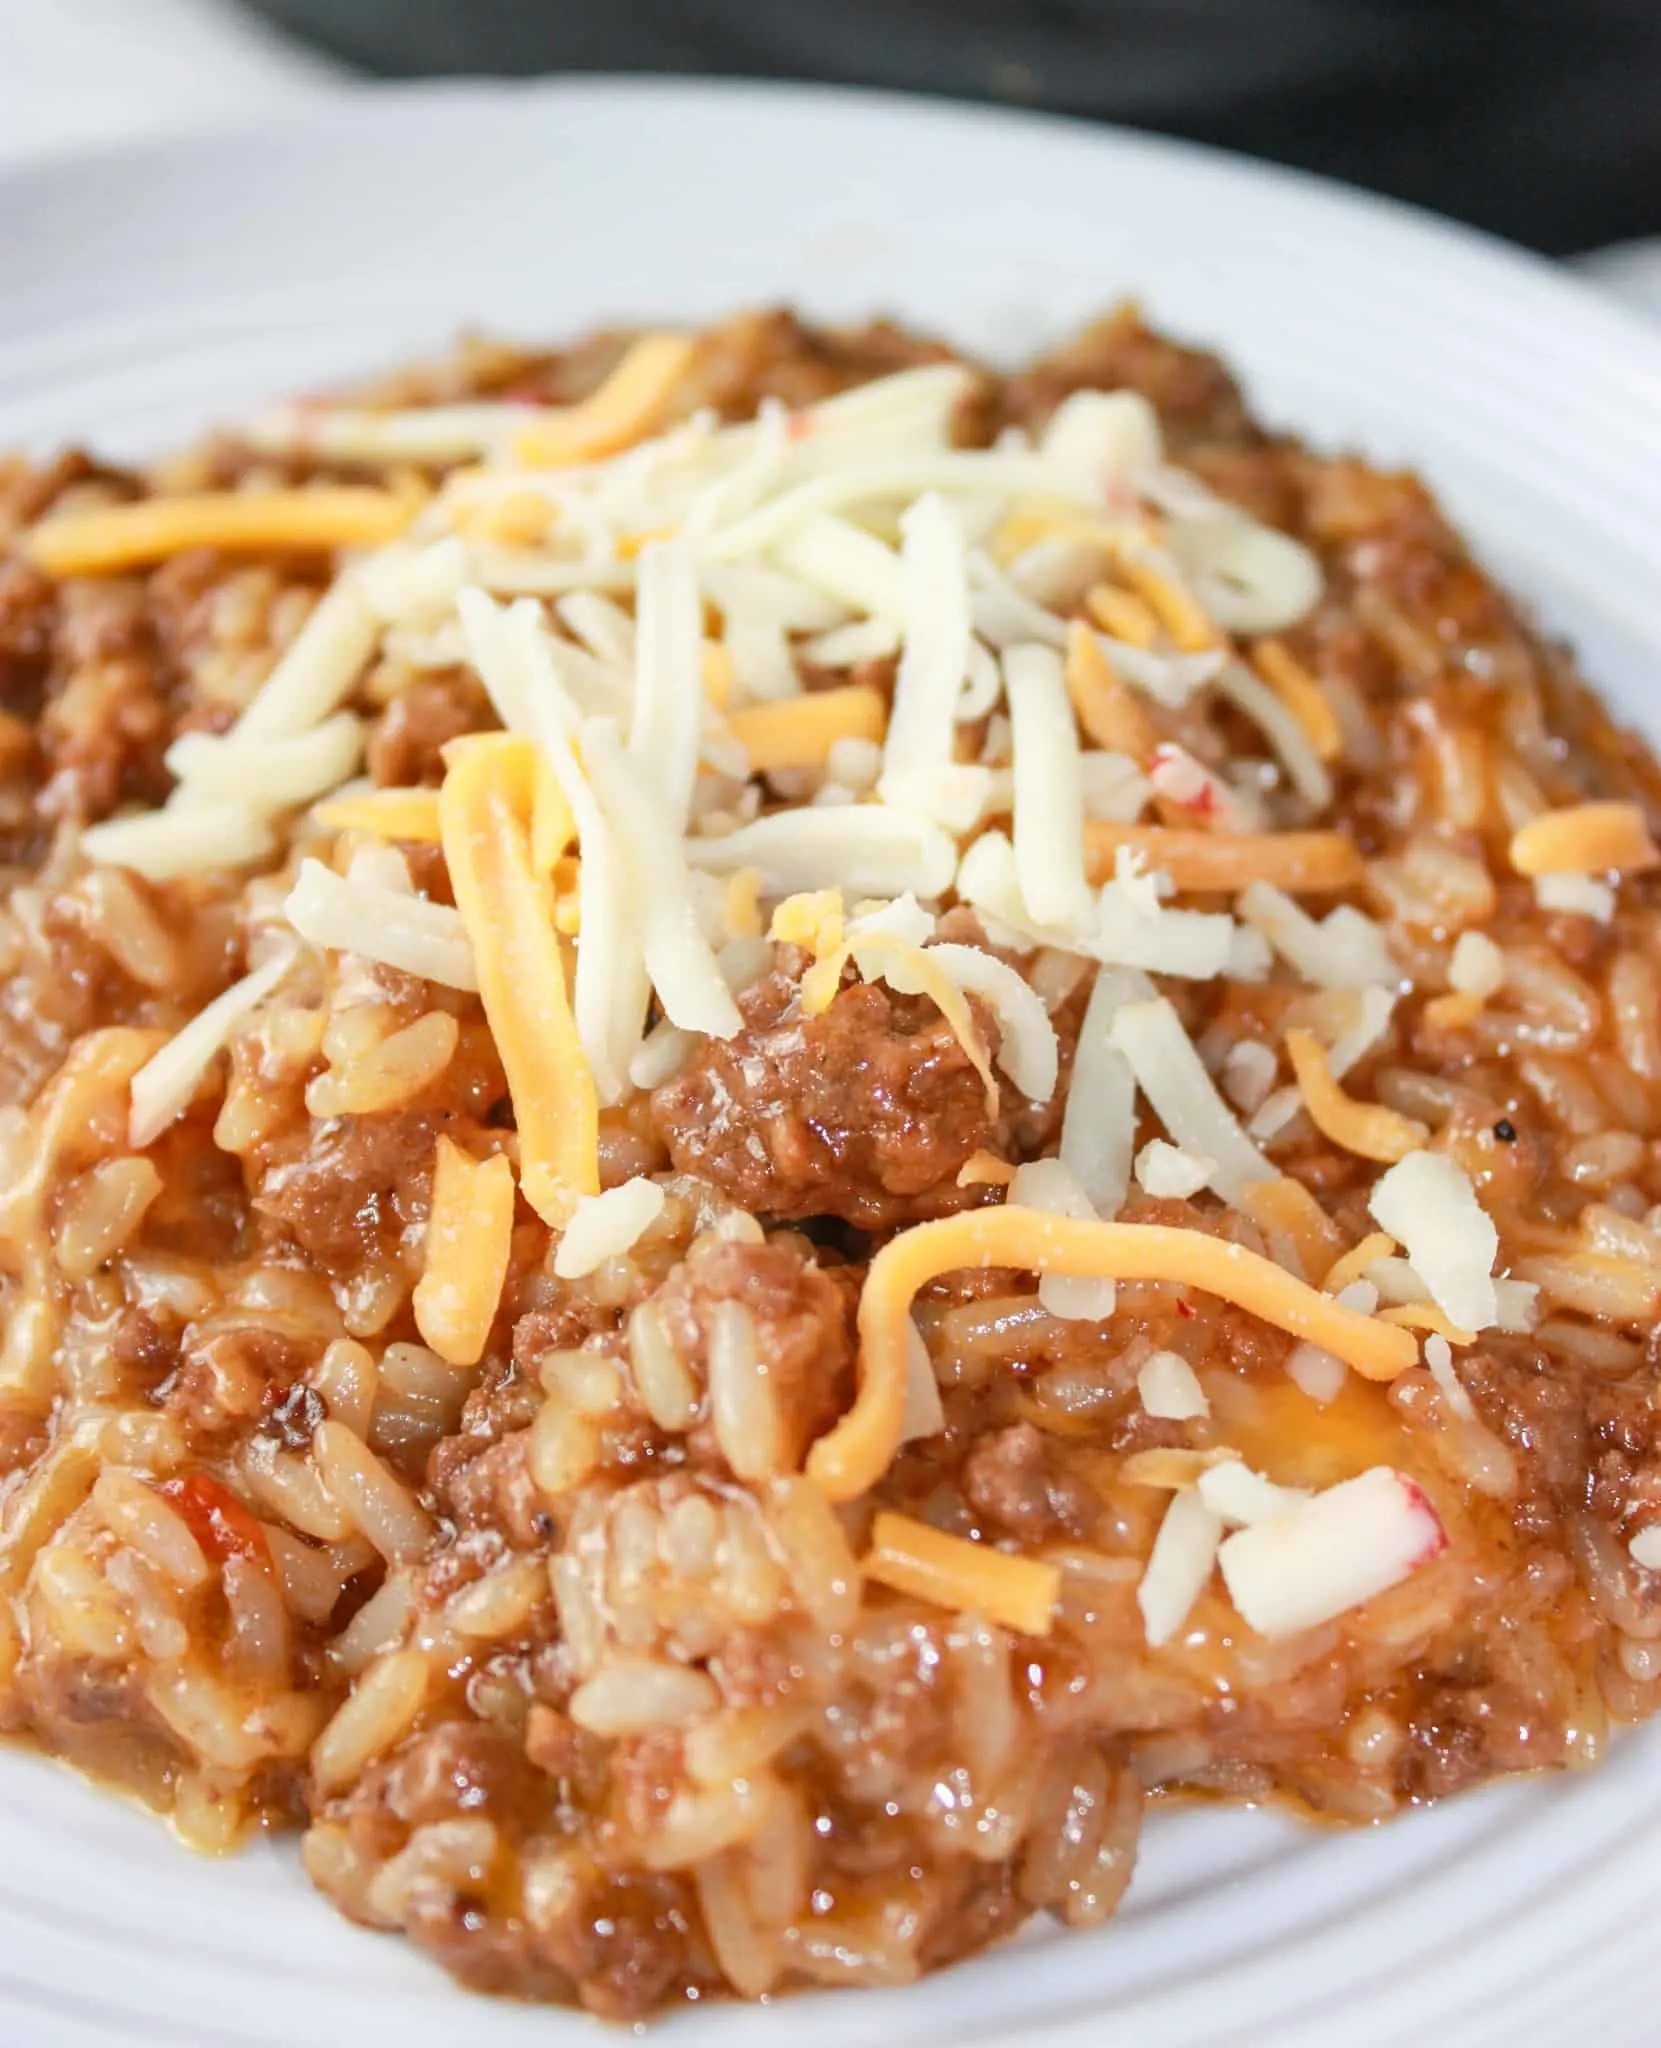 Instant Pot Cheesy BBQ Ground Beef and Rice can be on your table in short order any day of the week.  It is a enrobed in a delightful sauce that is a combination of sweet and smoky with a bit of heat.